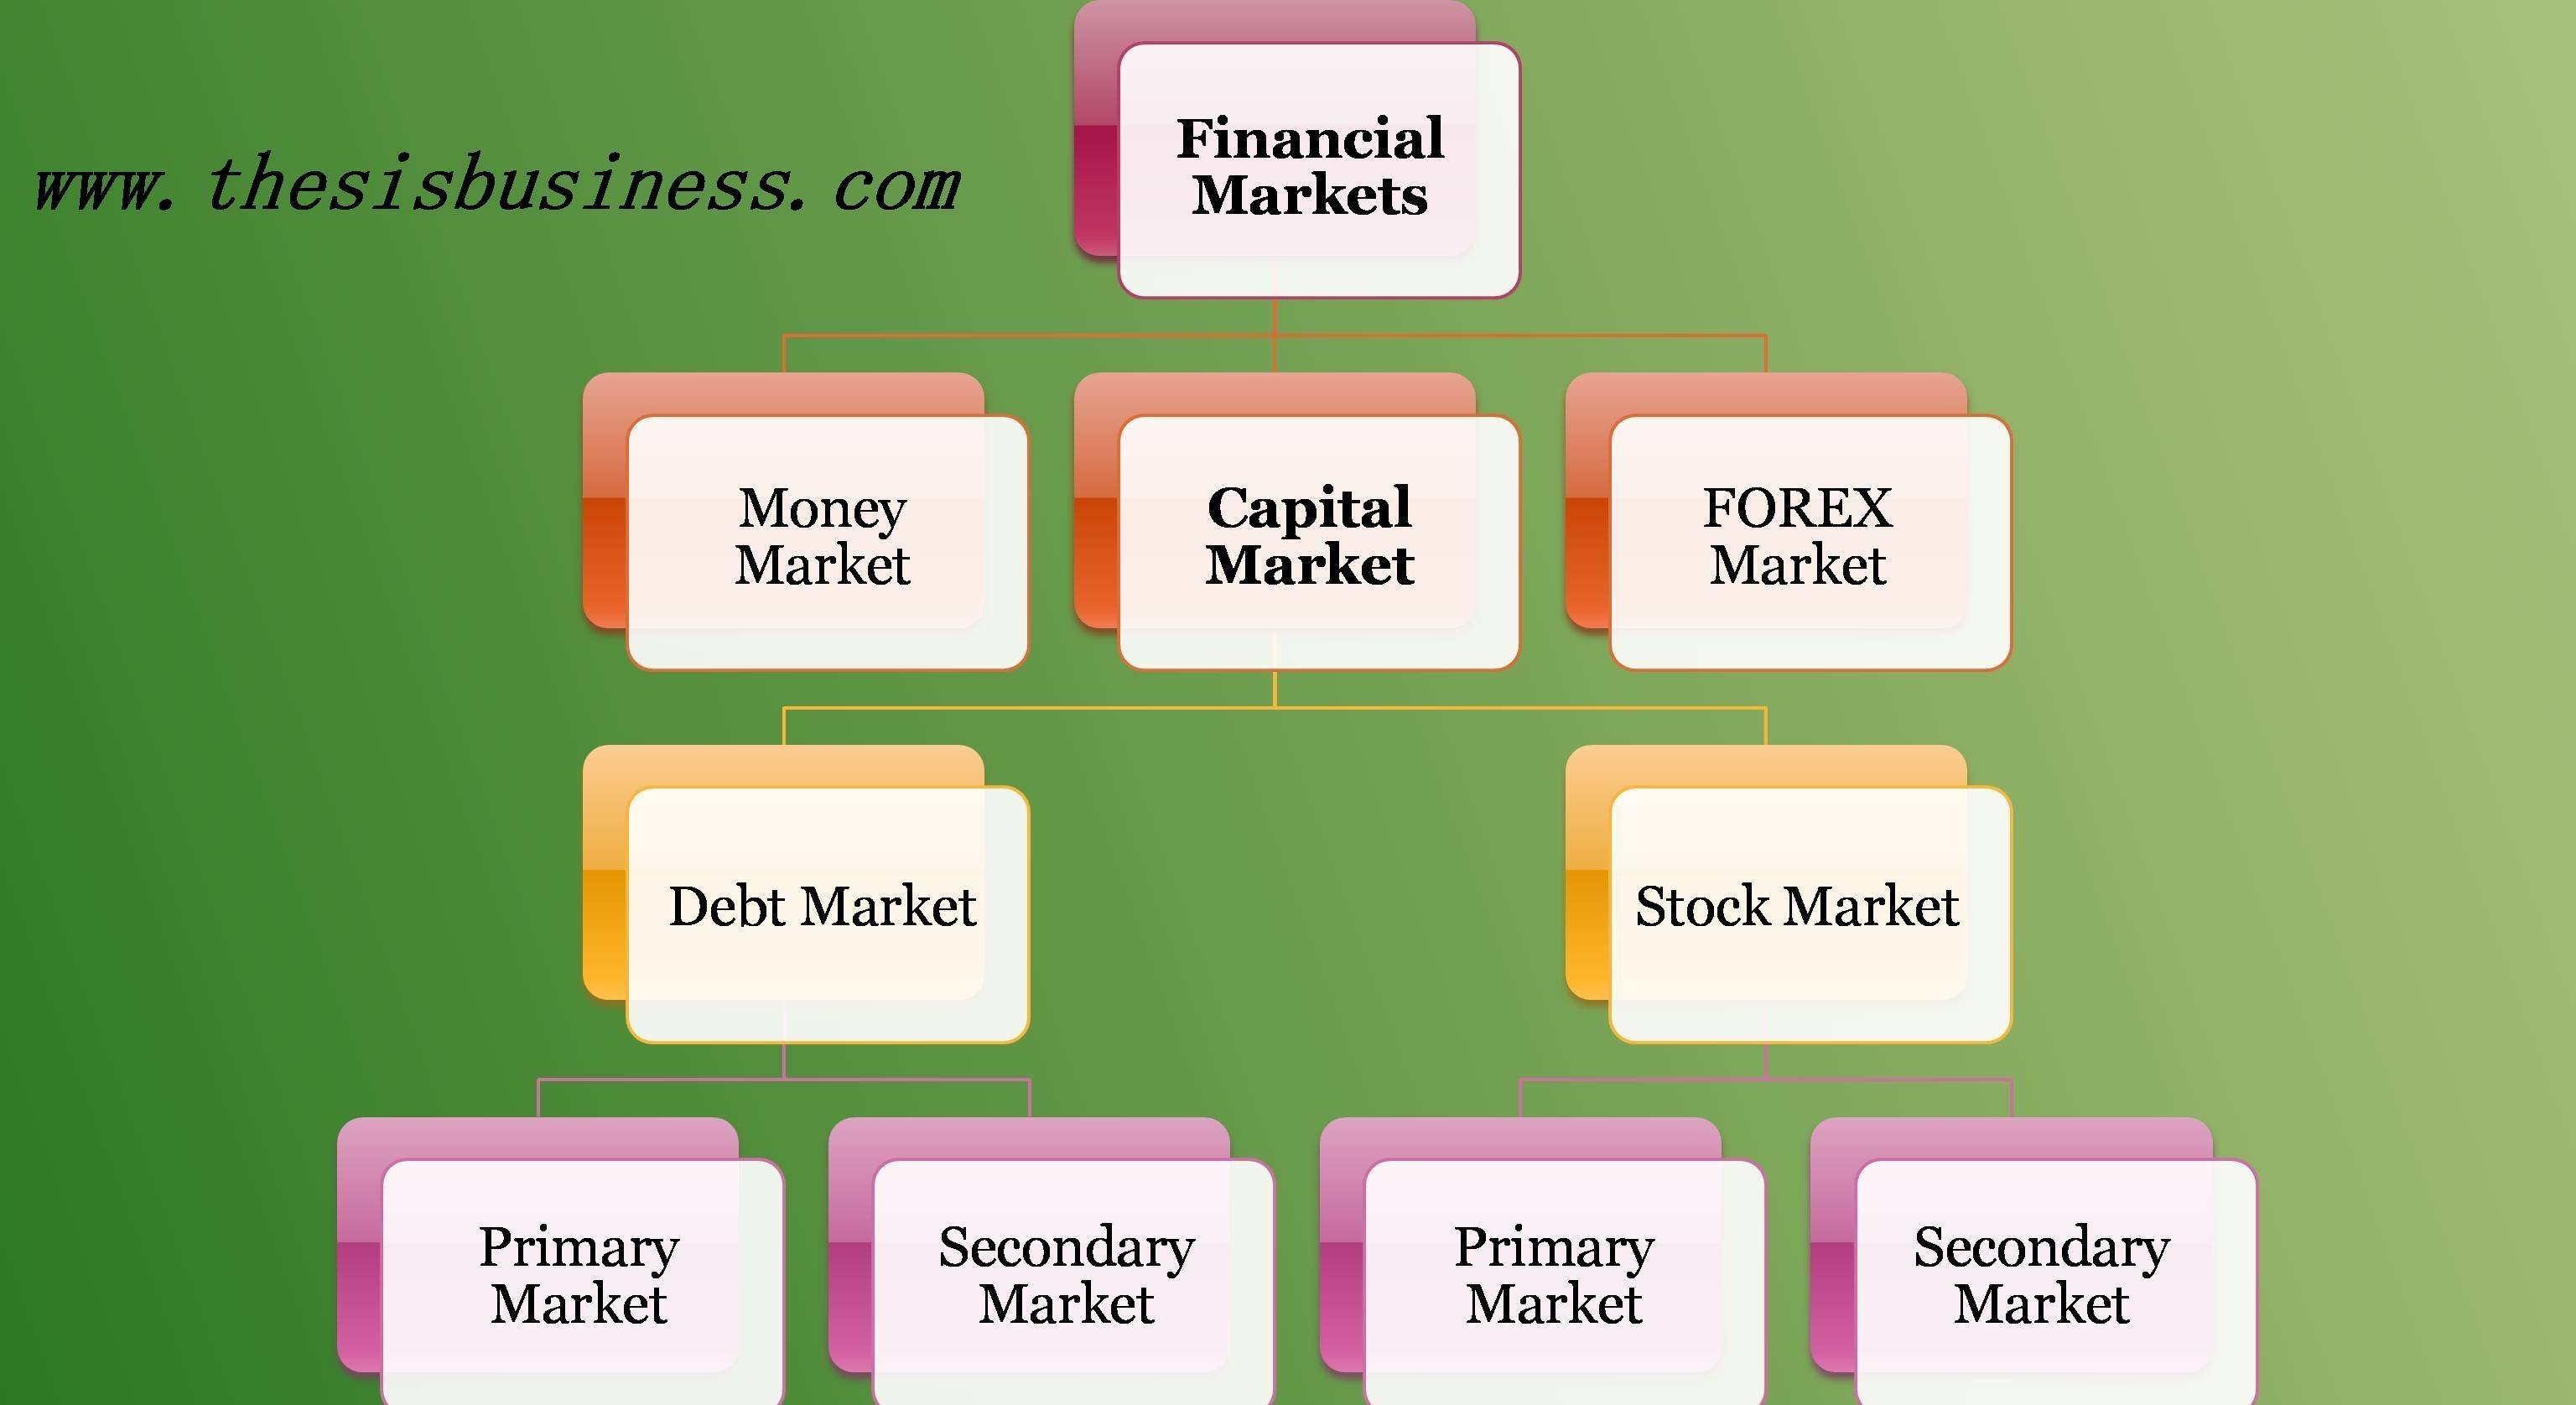 Primary market and Secondary market